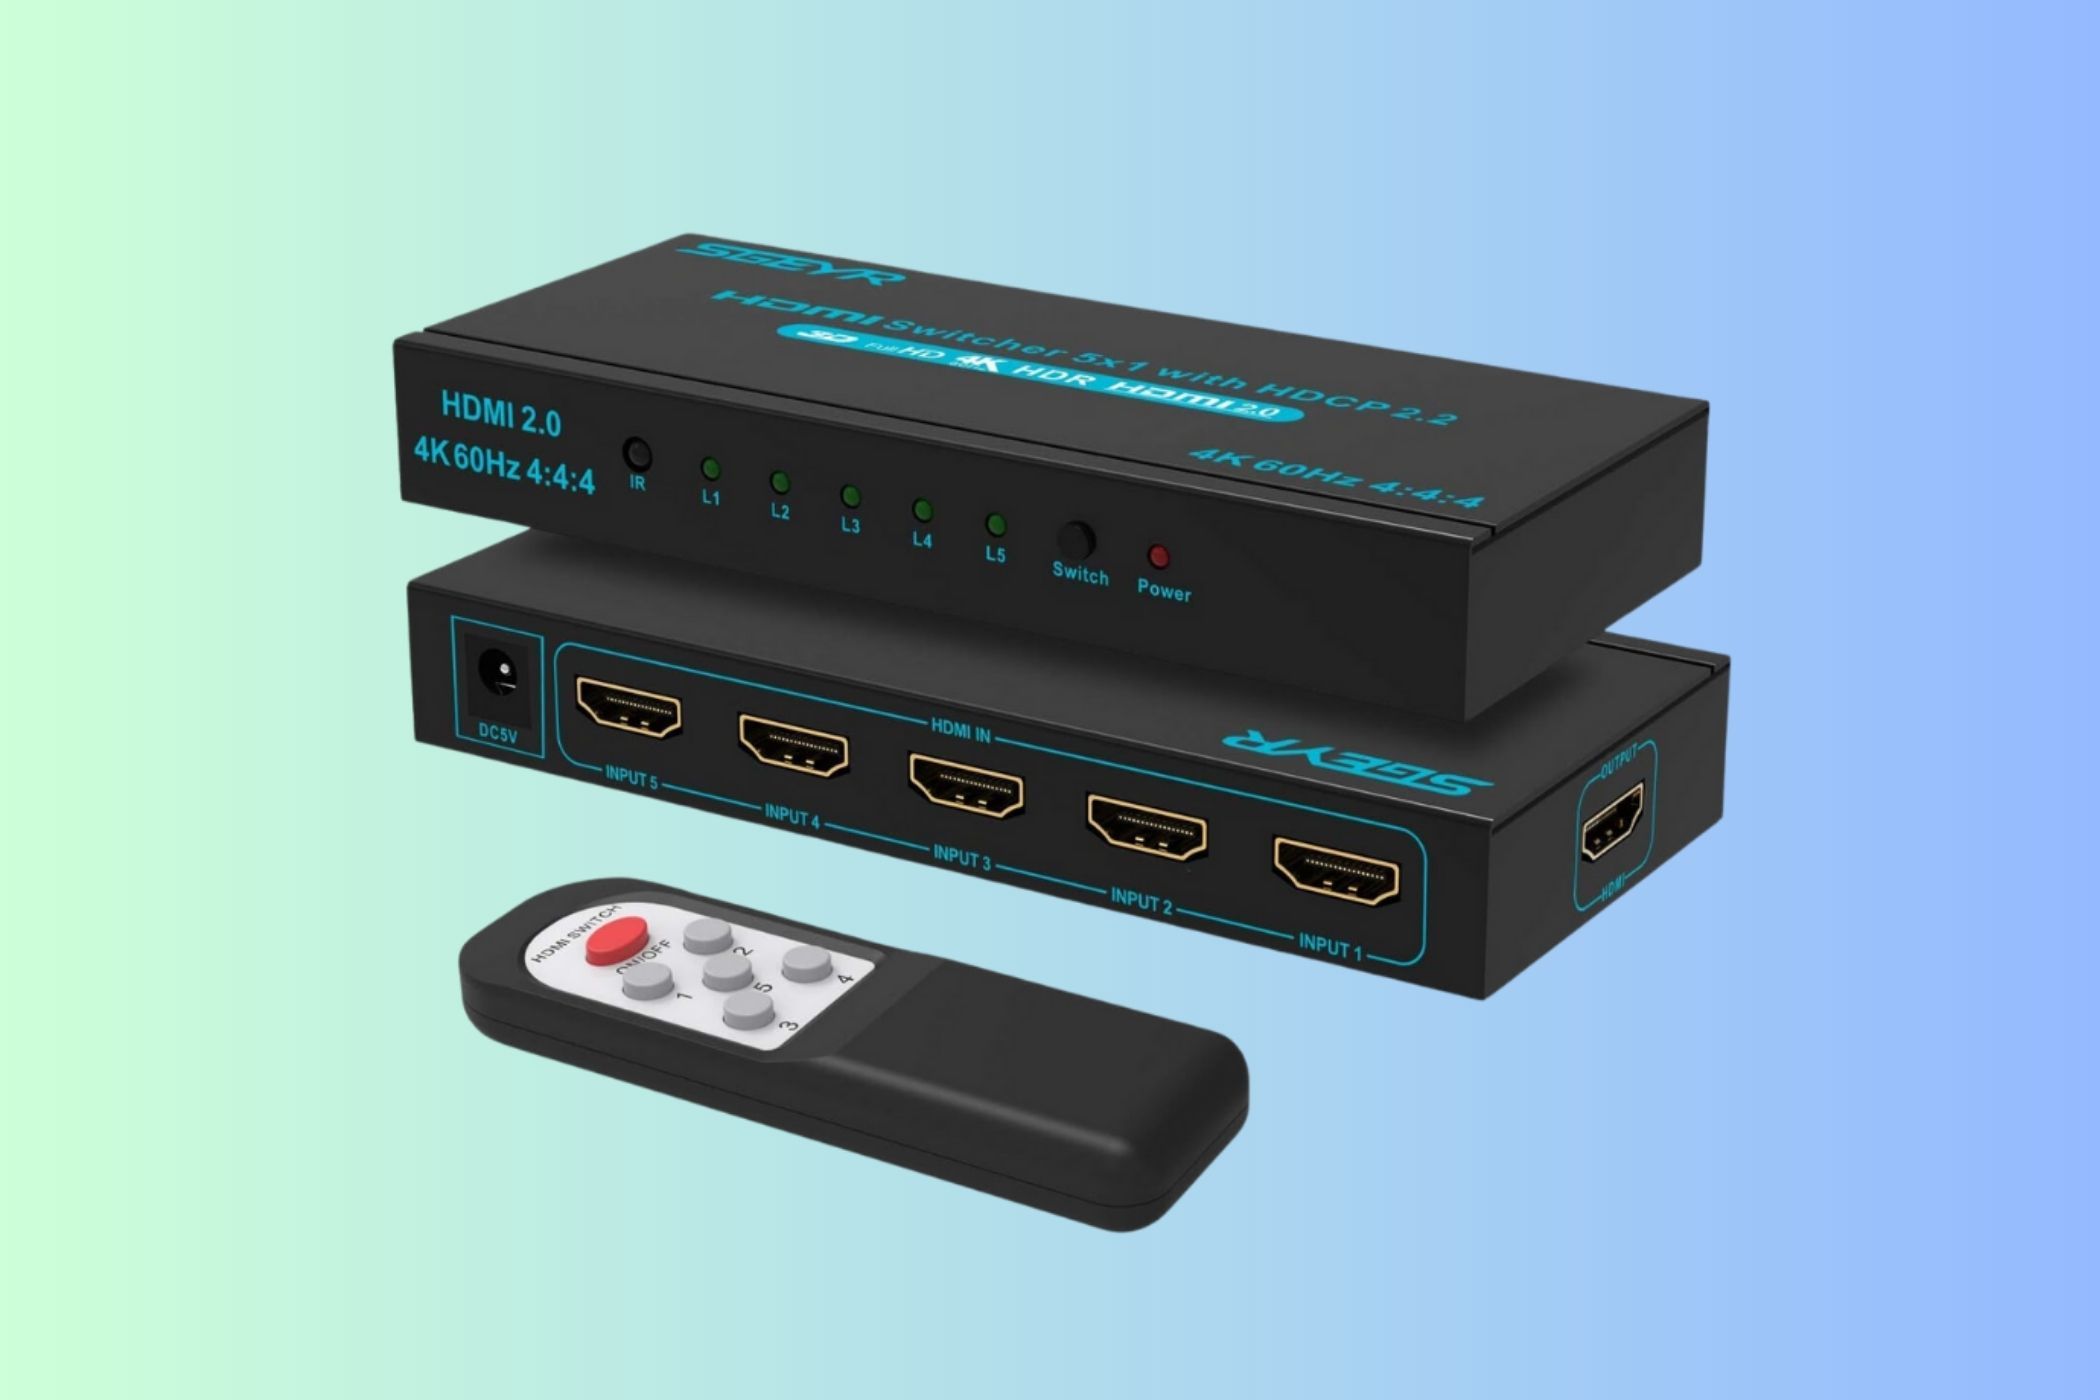 SGEYR 4K@60Hz 5x1 HDMI Switch on green and blue background